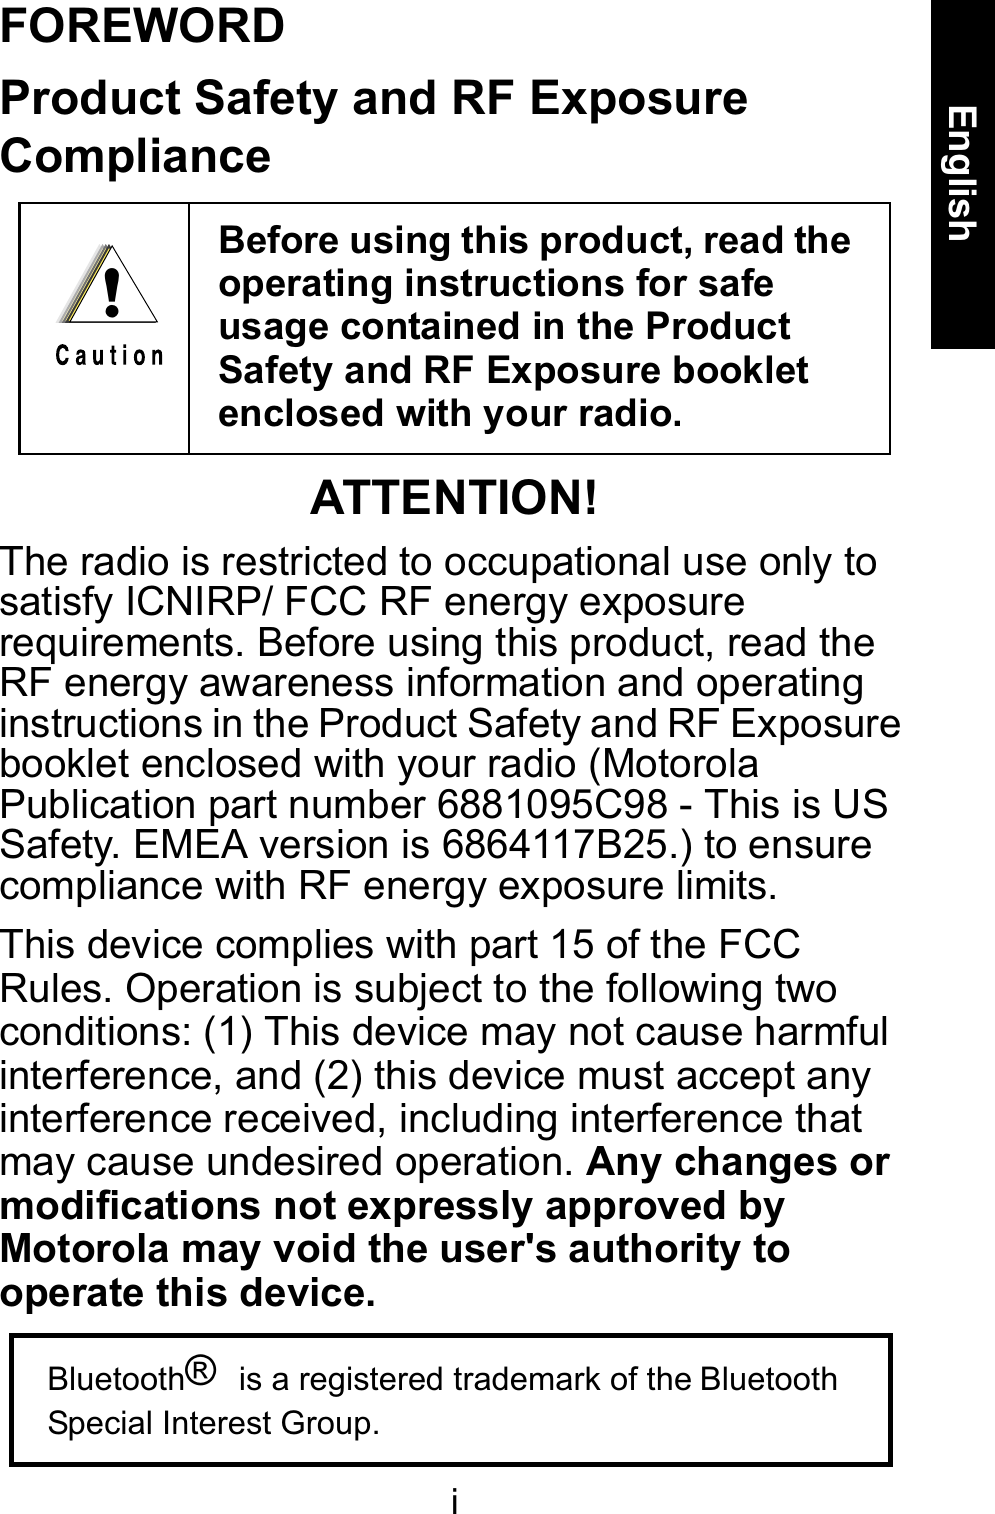 iEnglishFOREWORDProduct Safety and RF Exposure ComplianceATTENTION!The radio is restricted to occupational use only to satisfy ICNIRP/ FCC RF energy exposure requirements. Before using this product, read the RF energy awareness information and operating instructions in the Product Safety and RF Exposure booklet enclosed with your radio (Motorola Publication part number 6881095C98 - This is US Safety. EMEA version is 6864117B25.) to ensure compliance with RF energy exposure limits.This device complies with part 15 of the FCC Rules. Operation is subject to the following two conditions: (1) This device may not cause harmful interference, and (2) this device must accept any interference received, including interference that may cause undesired operation.Any changes ormodifications not expressly approved by Motorola may void the user&apos;s authority to operate this device.Before using this product, read the operating instructions for safe usage contained in the Product Safety and RF Exposure booklet enclosed with your radio. !Bluetooth® is a registered trademark of the BluetoothSpecial Interest Group.